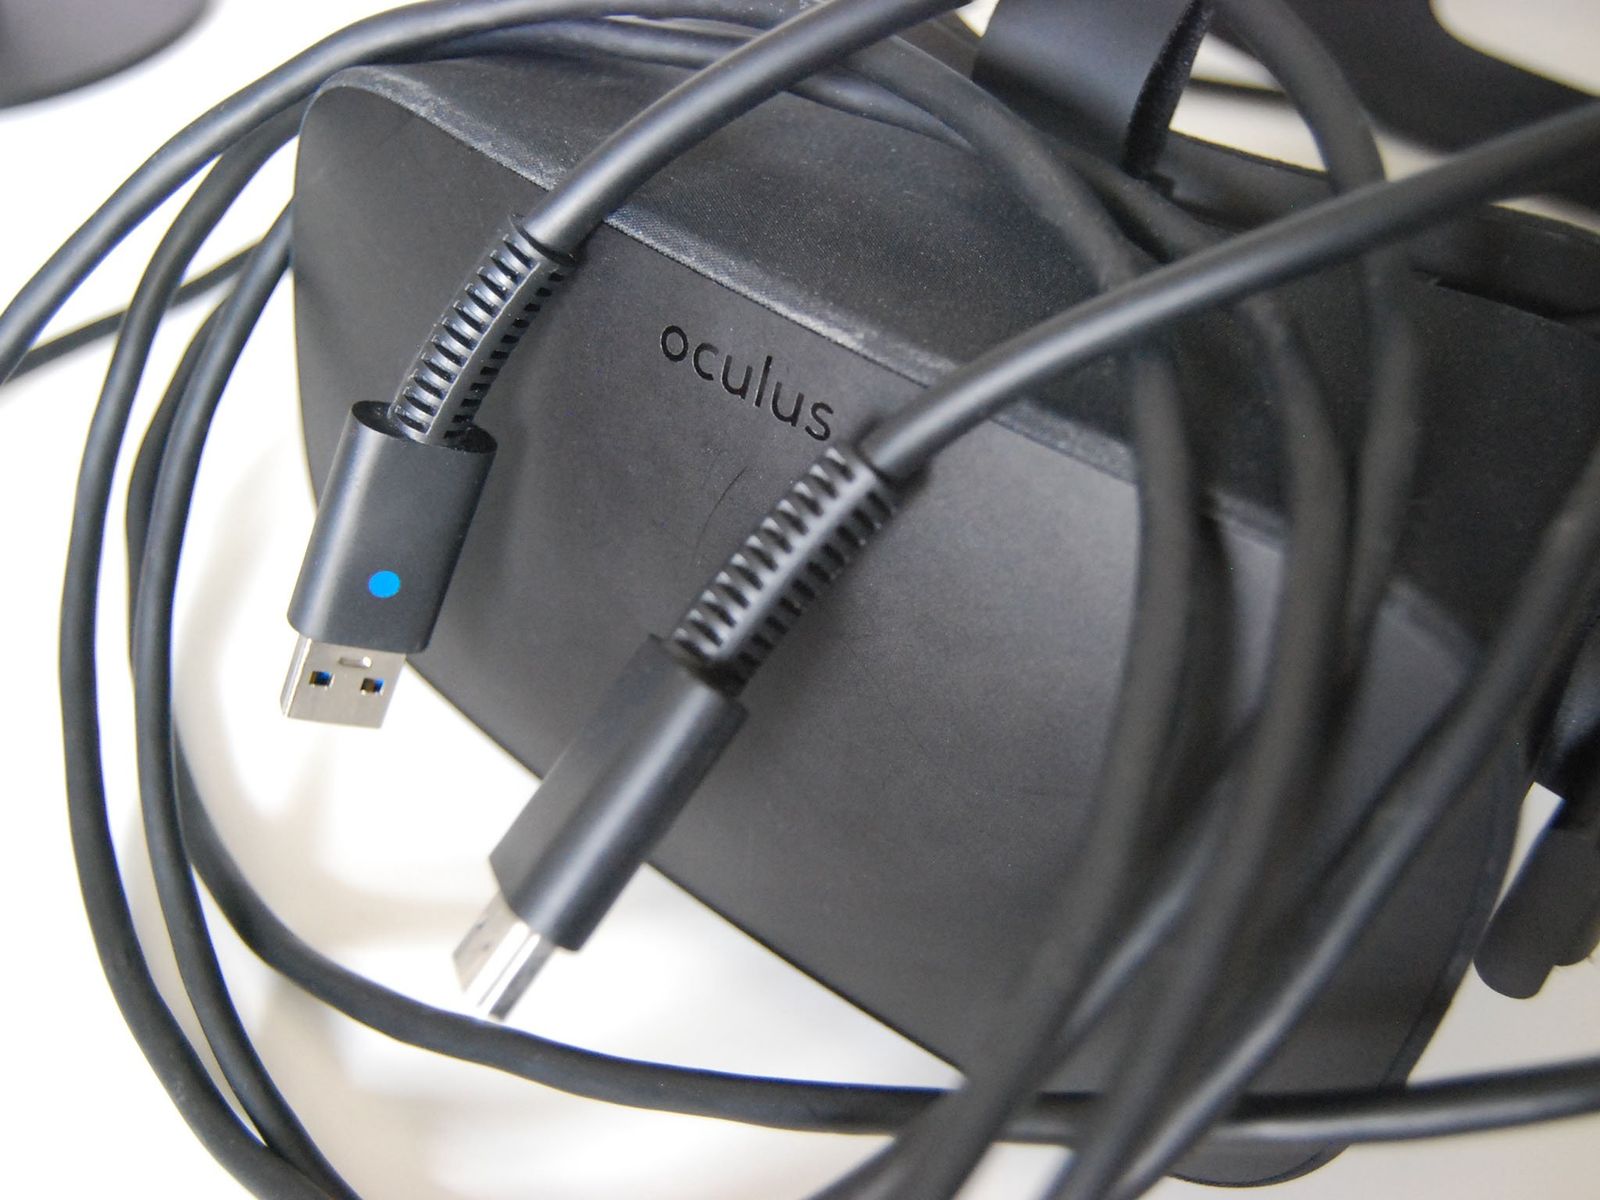 How to extend your Oculus Rift cables for about $20